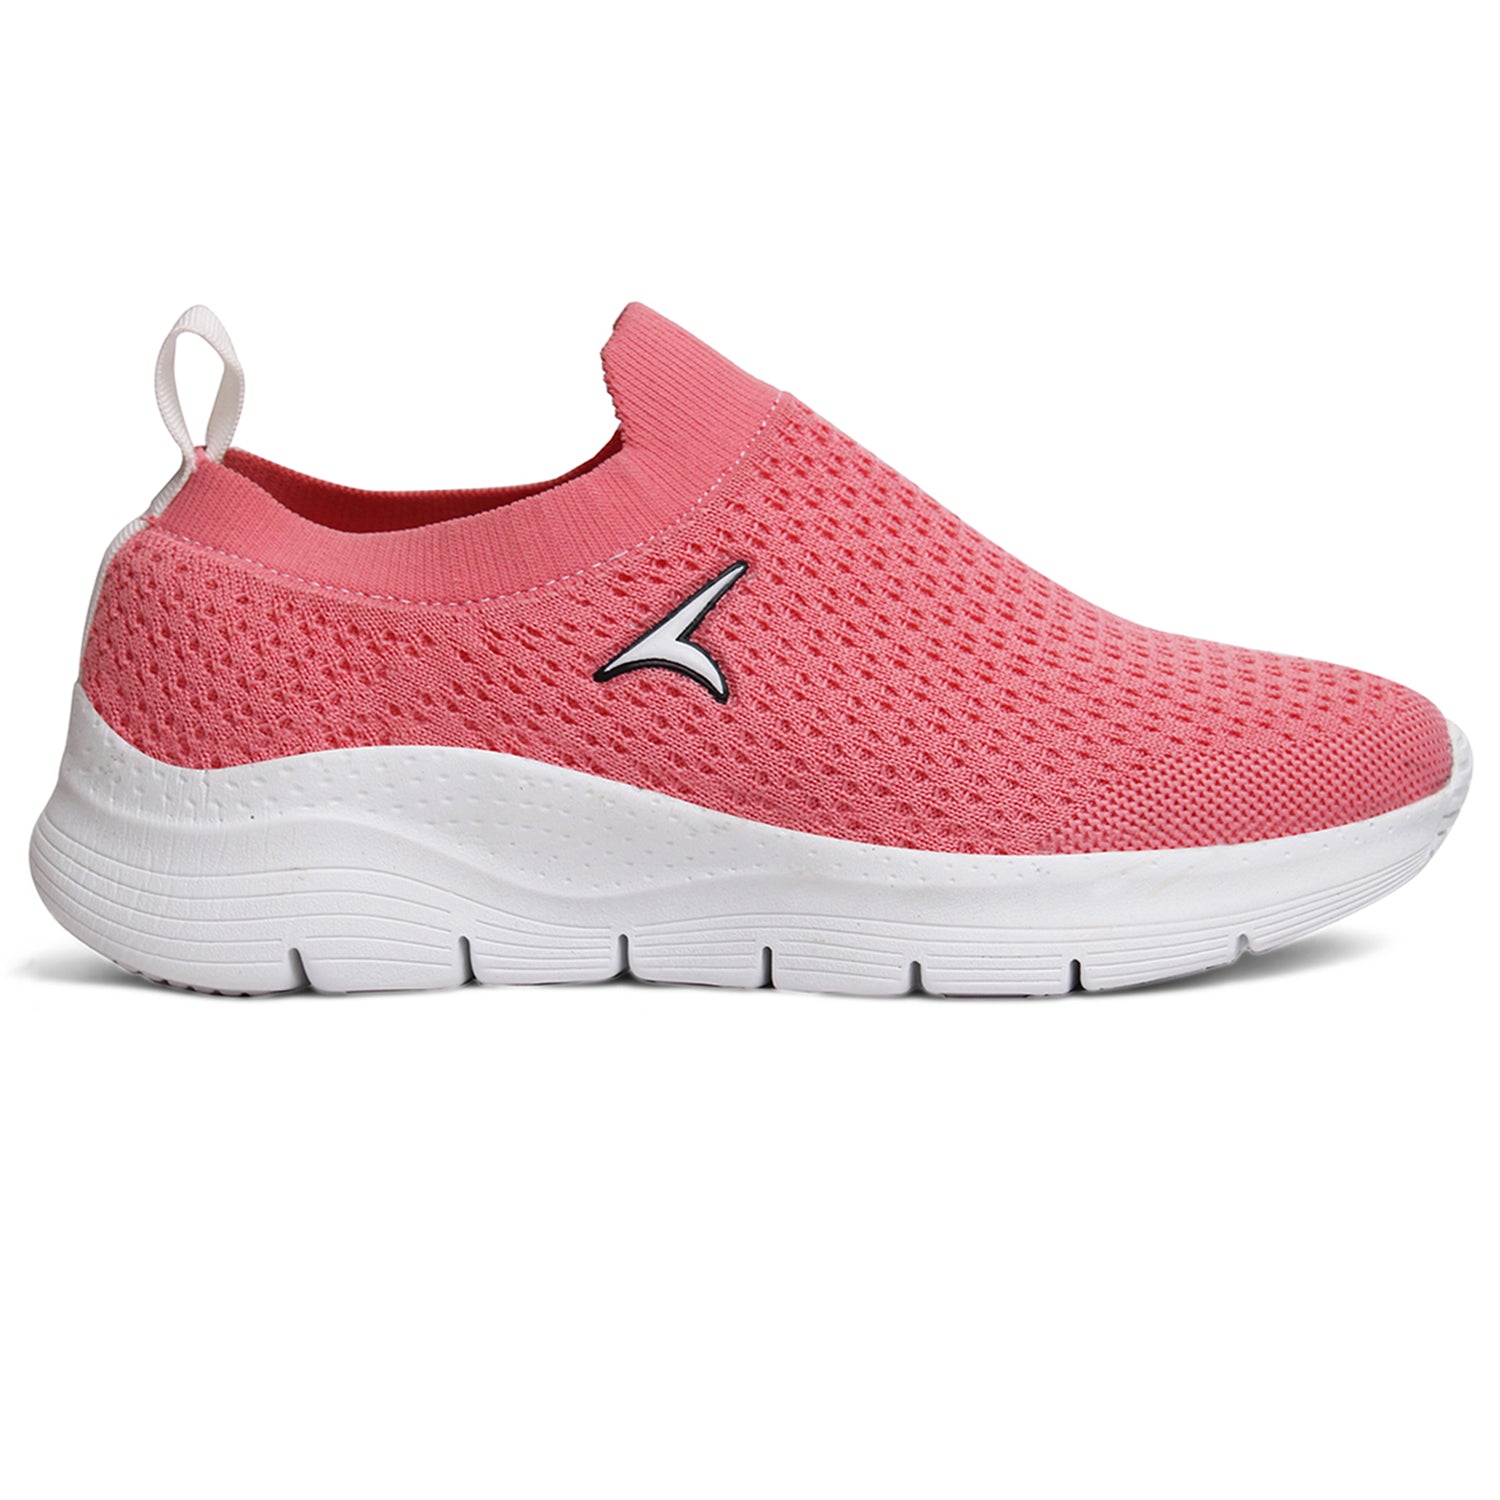 Shop Women Casual Shoes, Tracer India